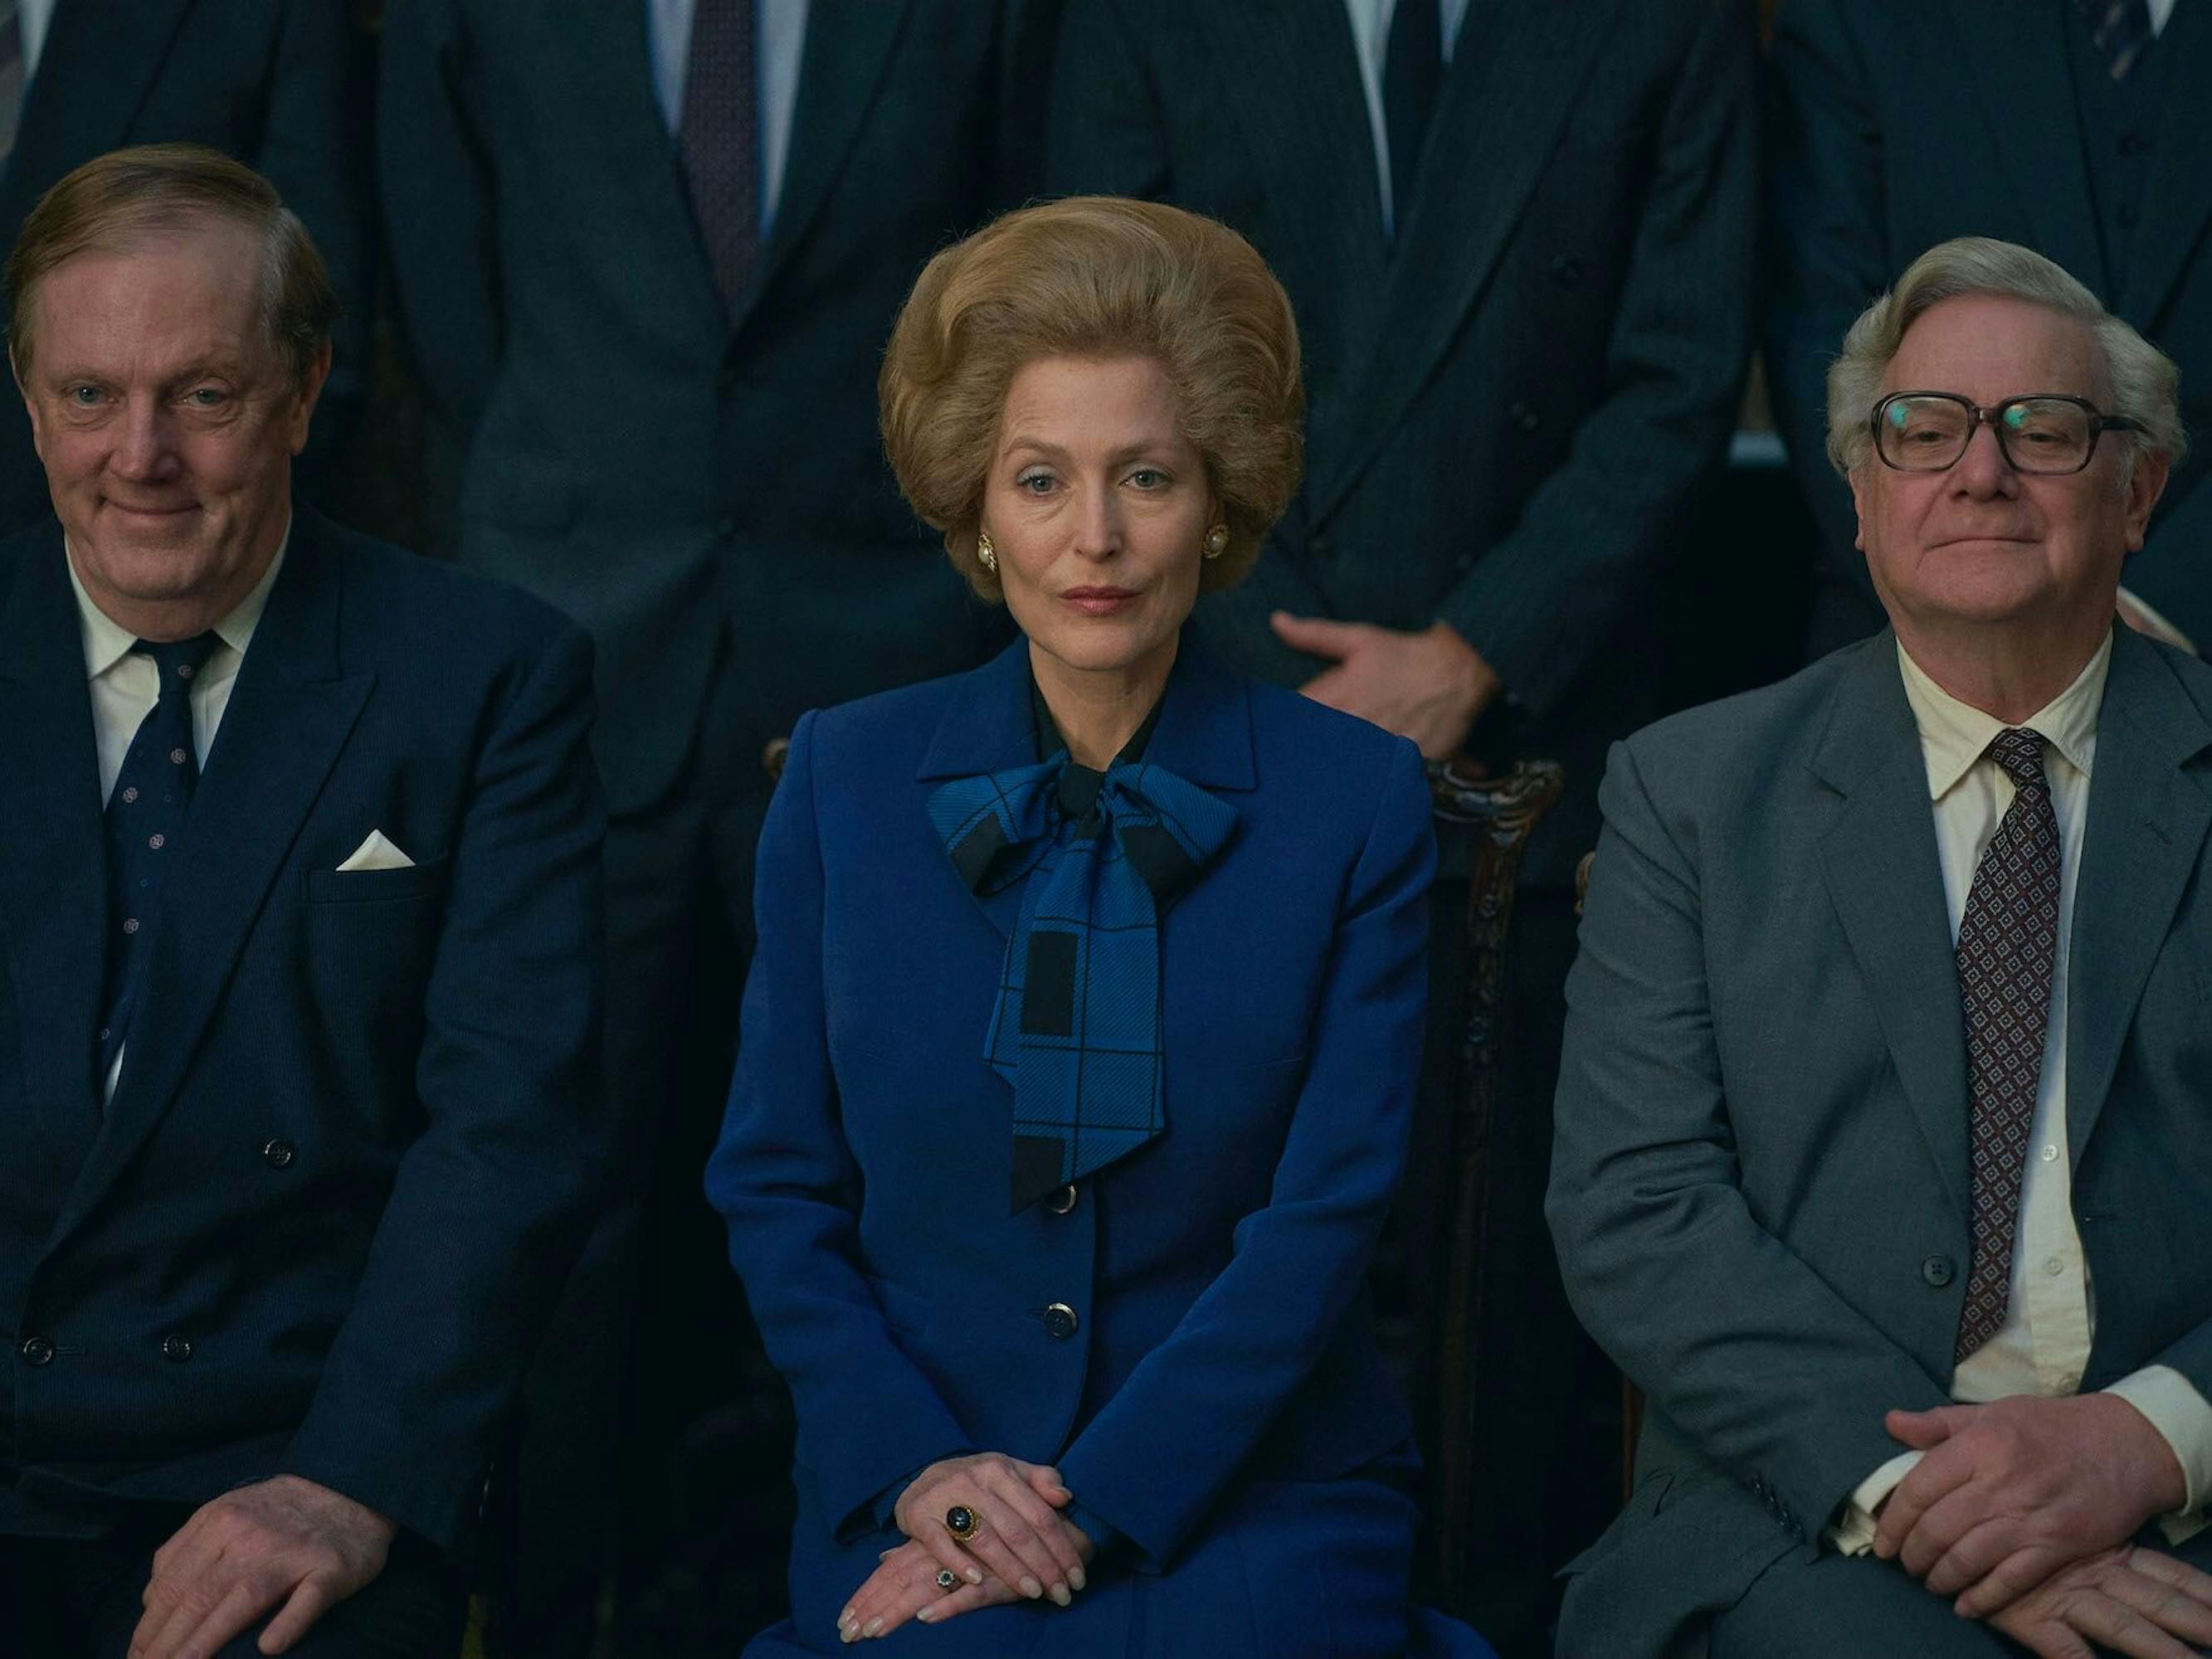 Margaret Thatcher (Gillian Anderson) and members of her cabinet sit for a picture.